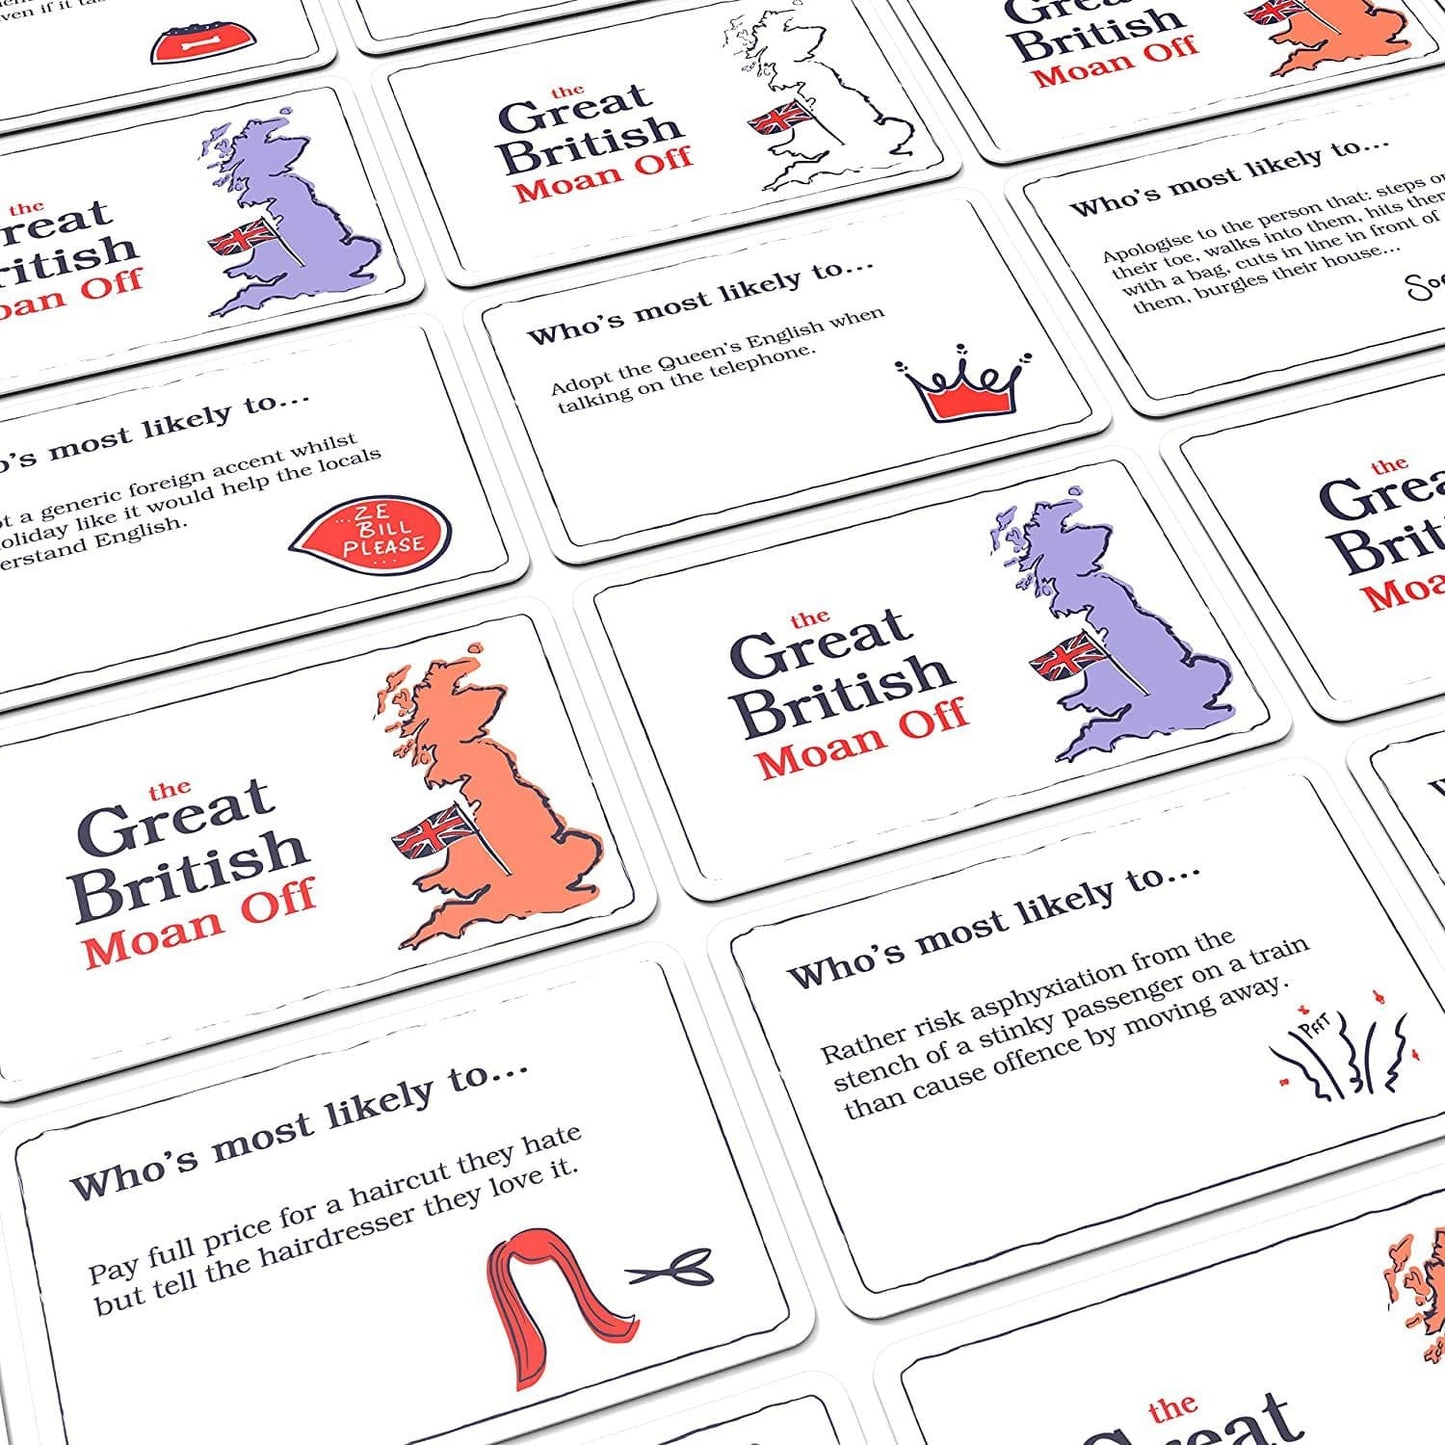 Great British Moan Off Game Comedy Family Card Game